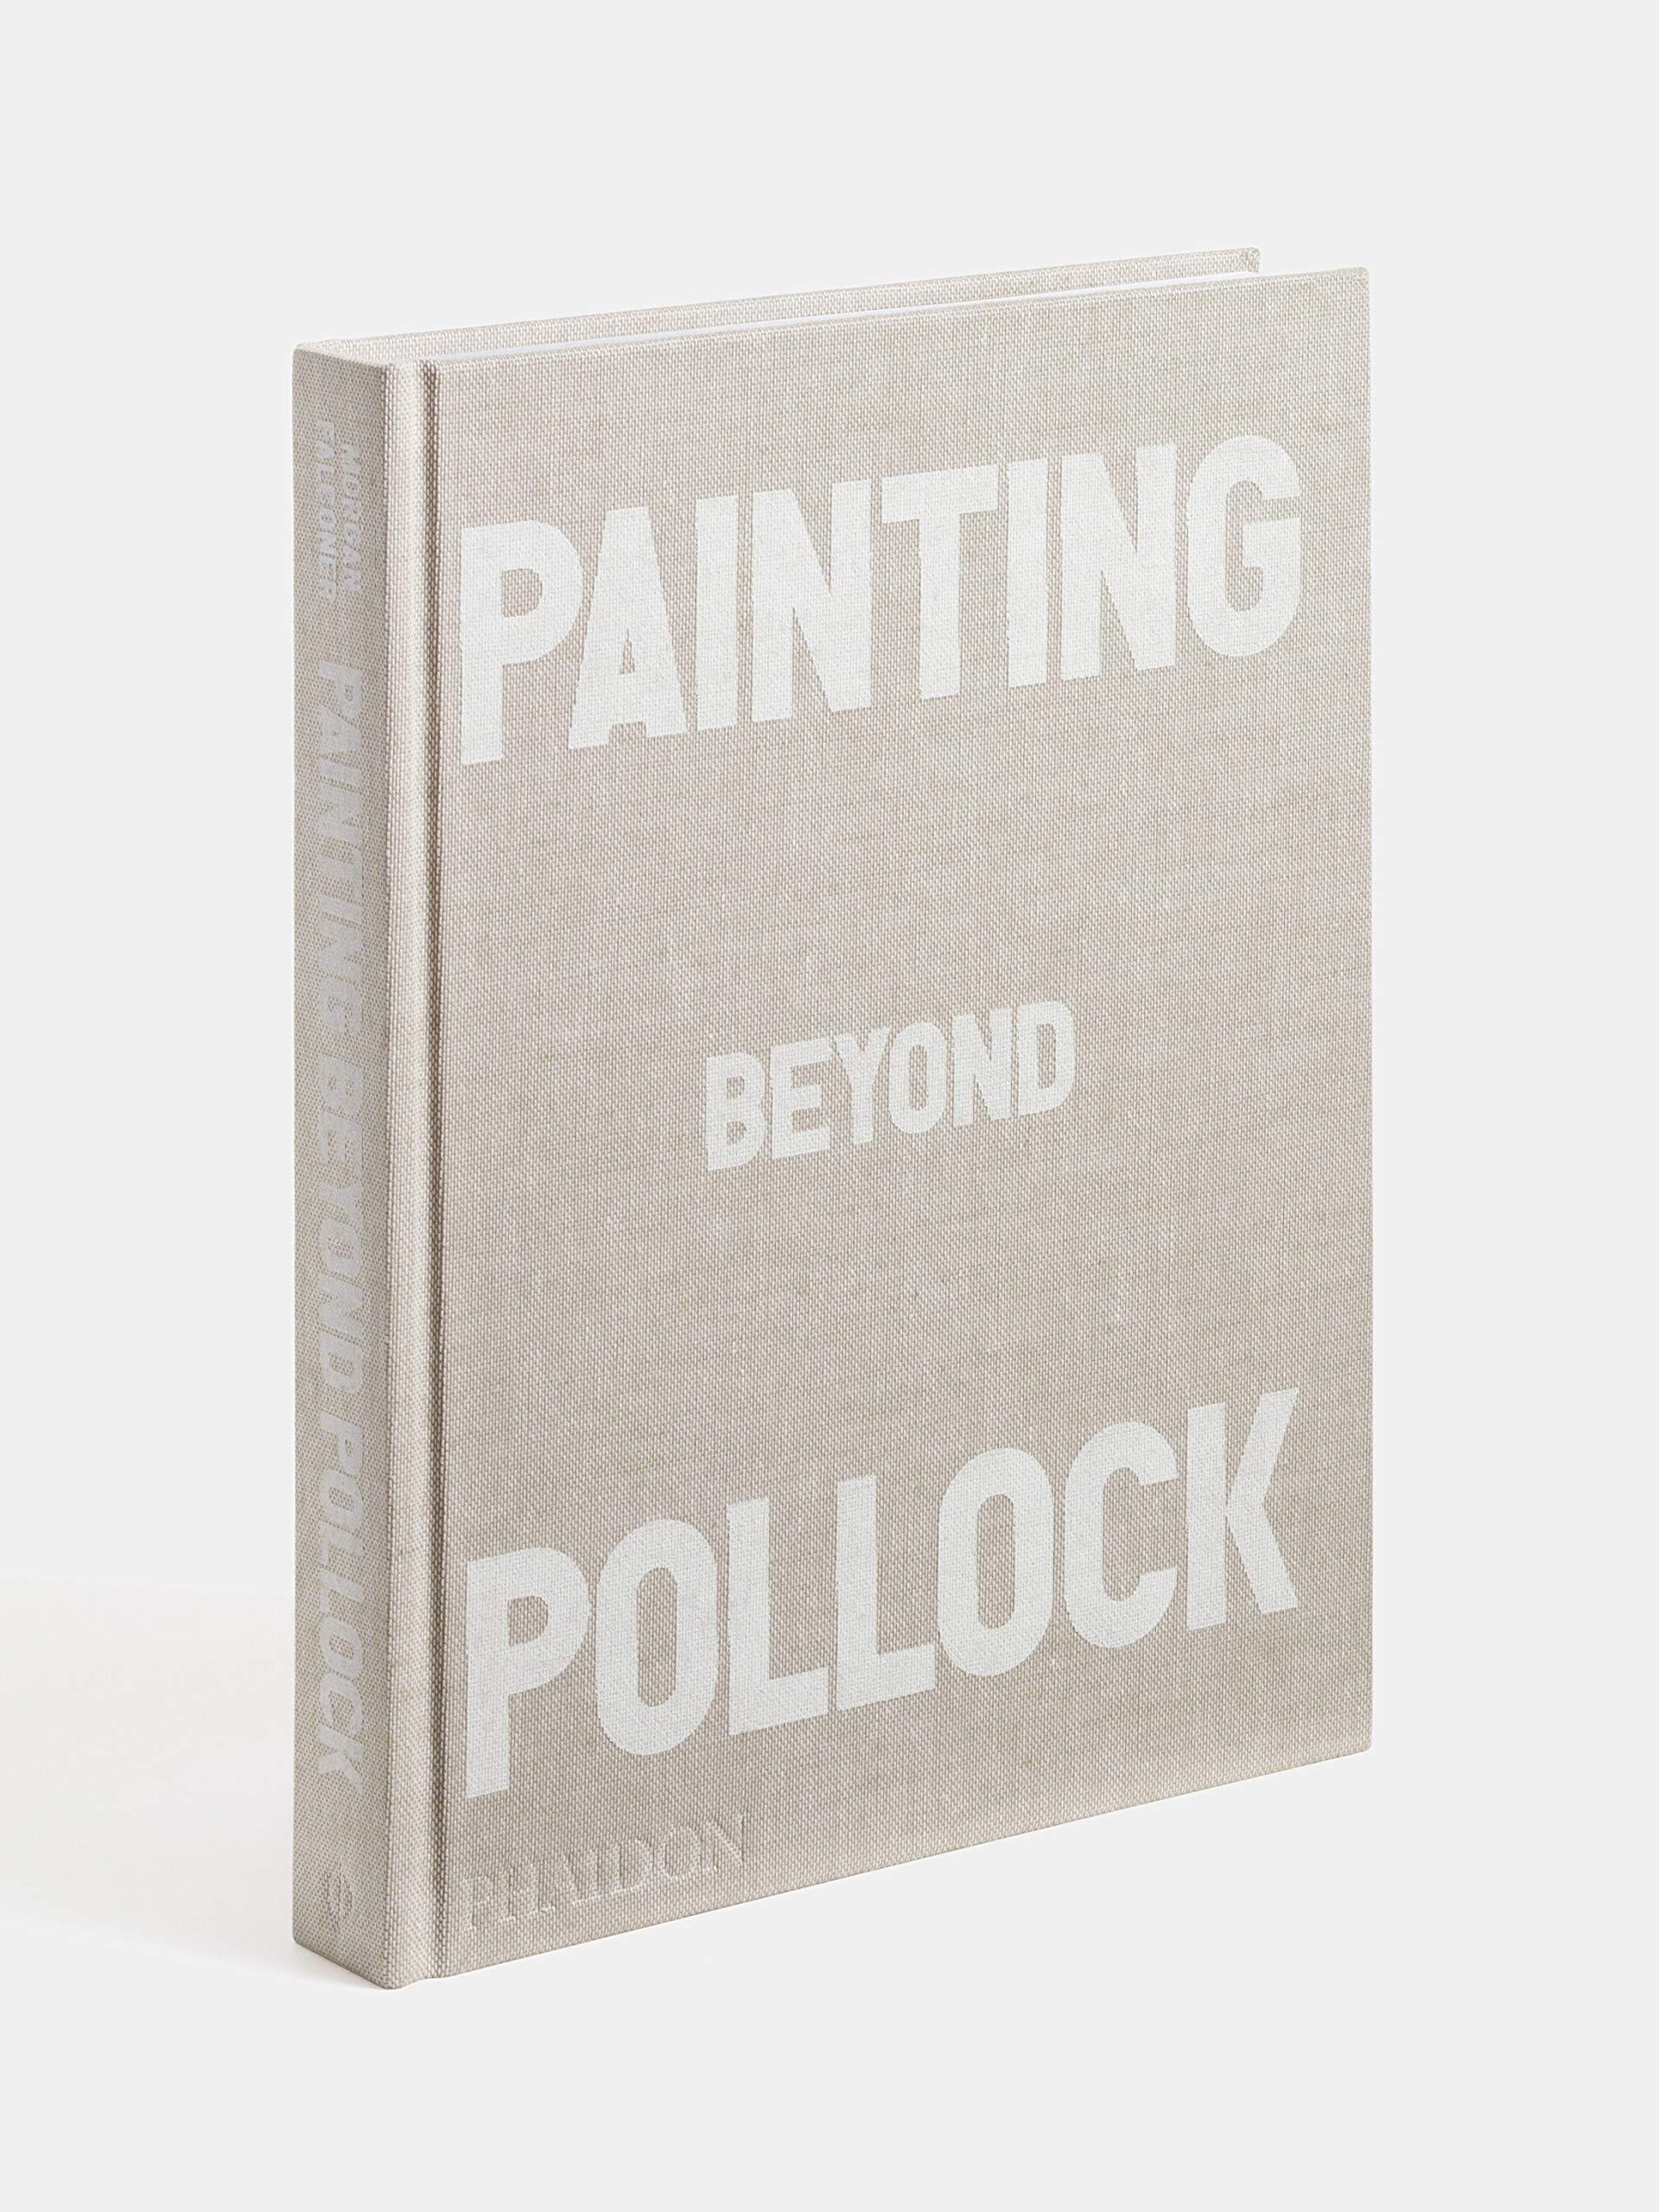 Modern In Stock in Los Angeles, Painting Beyond Pollock by Morgan Falconer